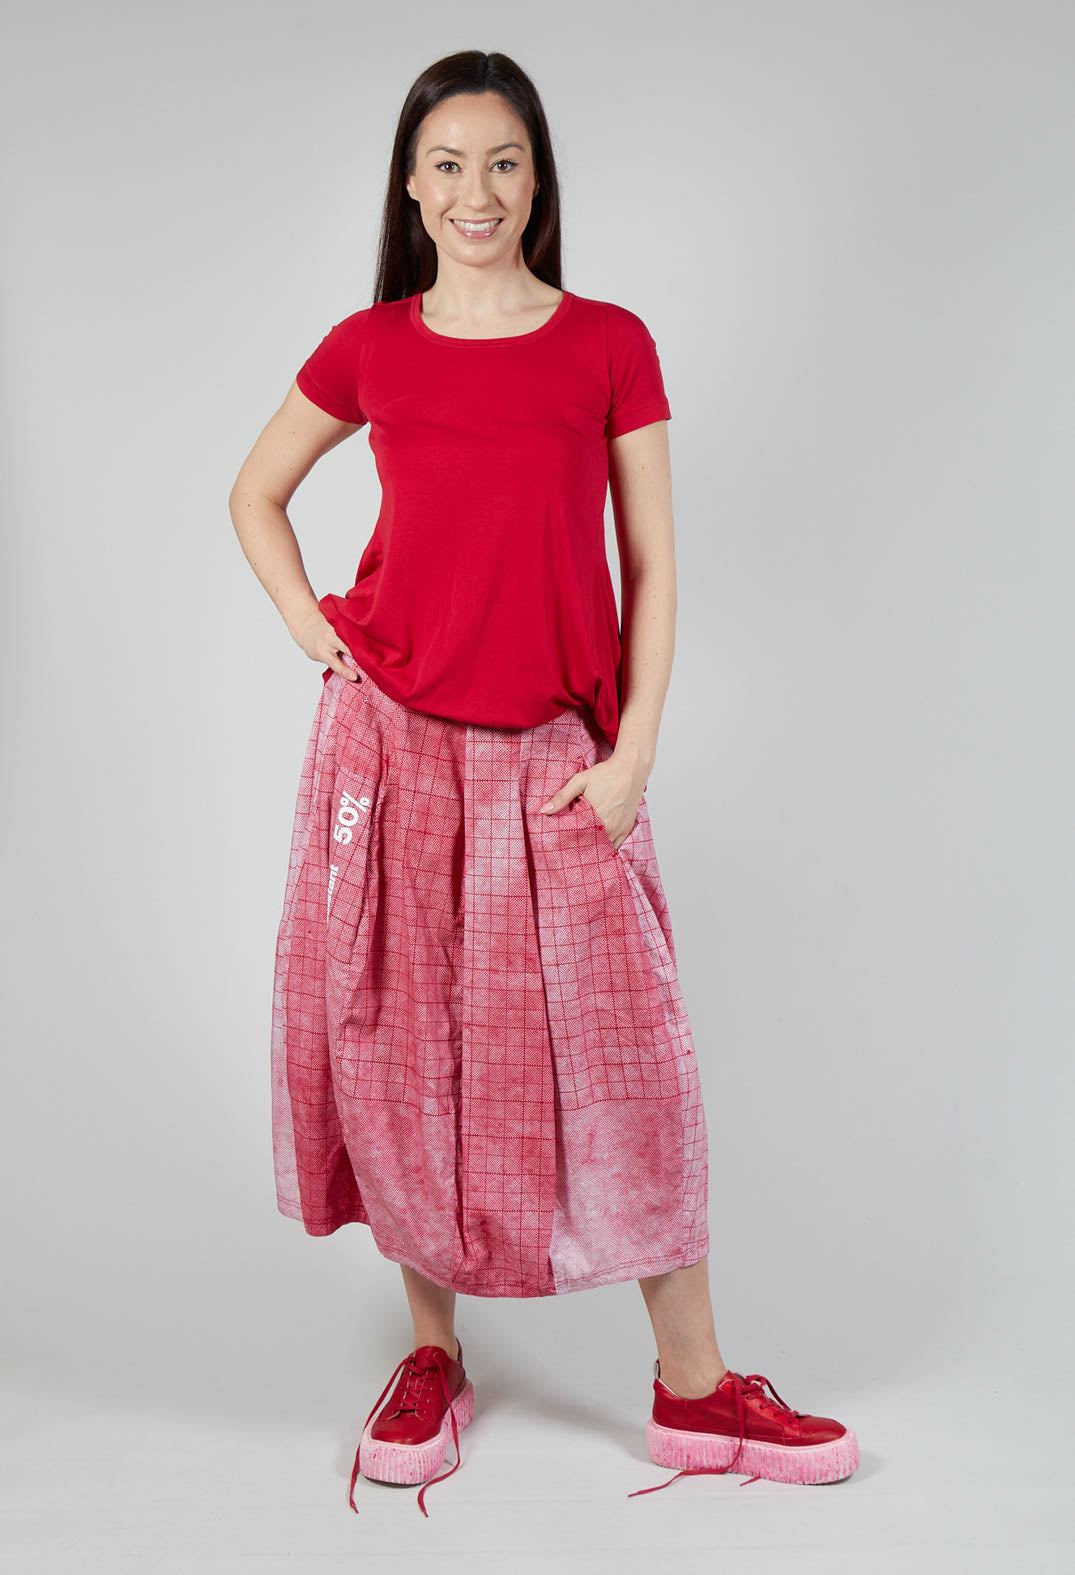 Pull On Tulip Skirt in Placed Chili Print